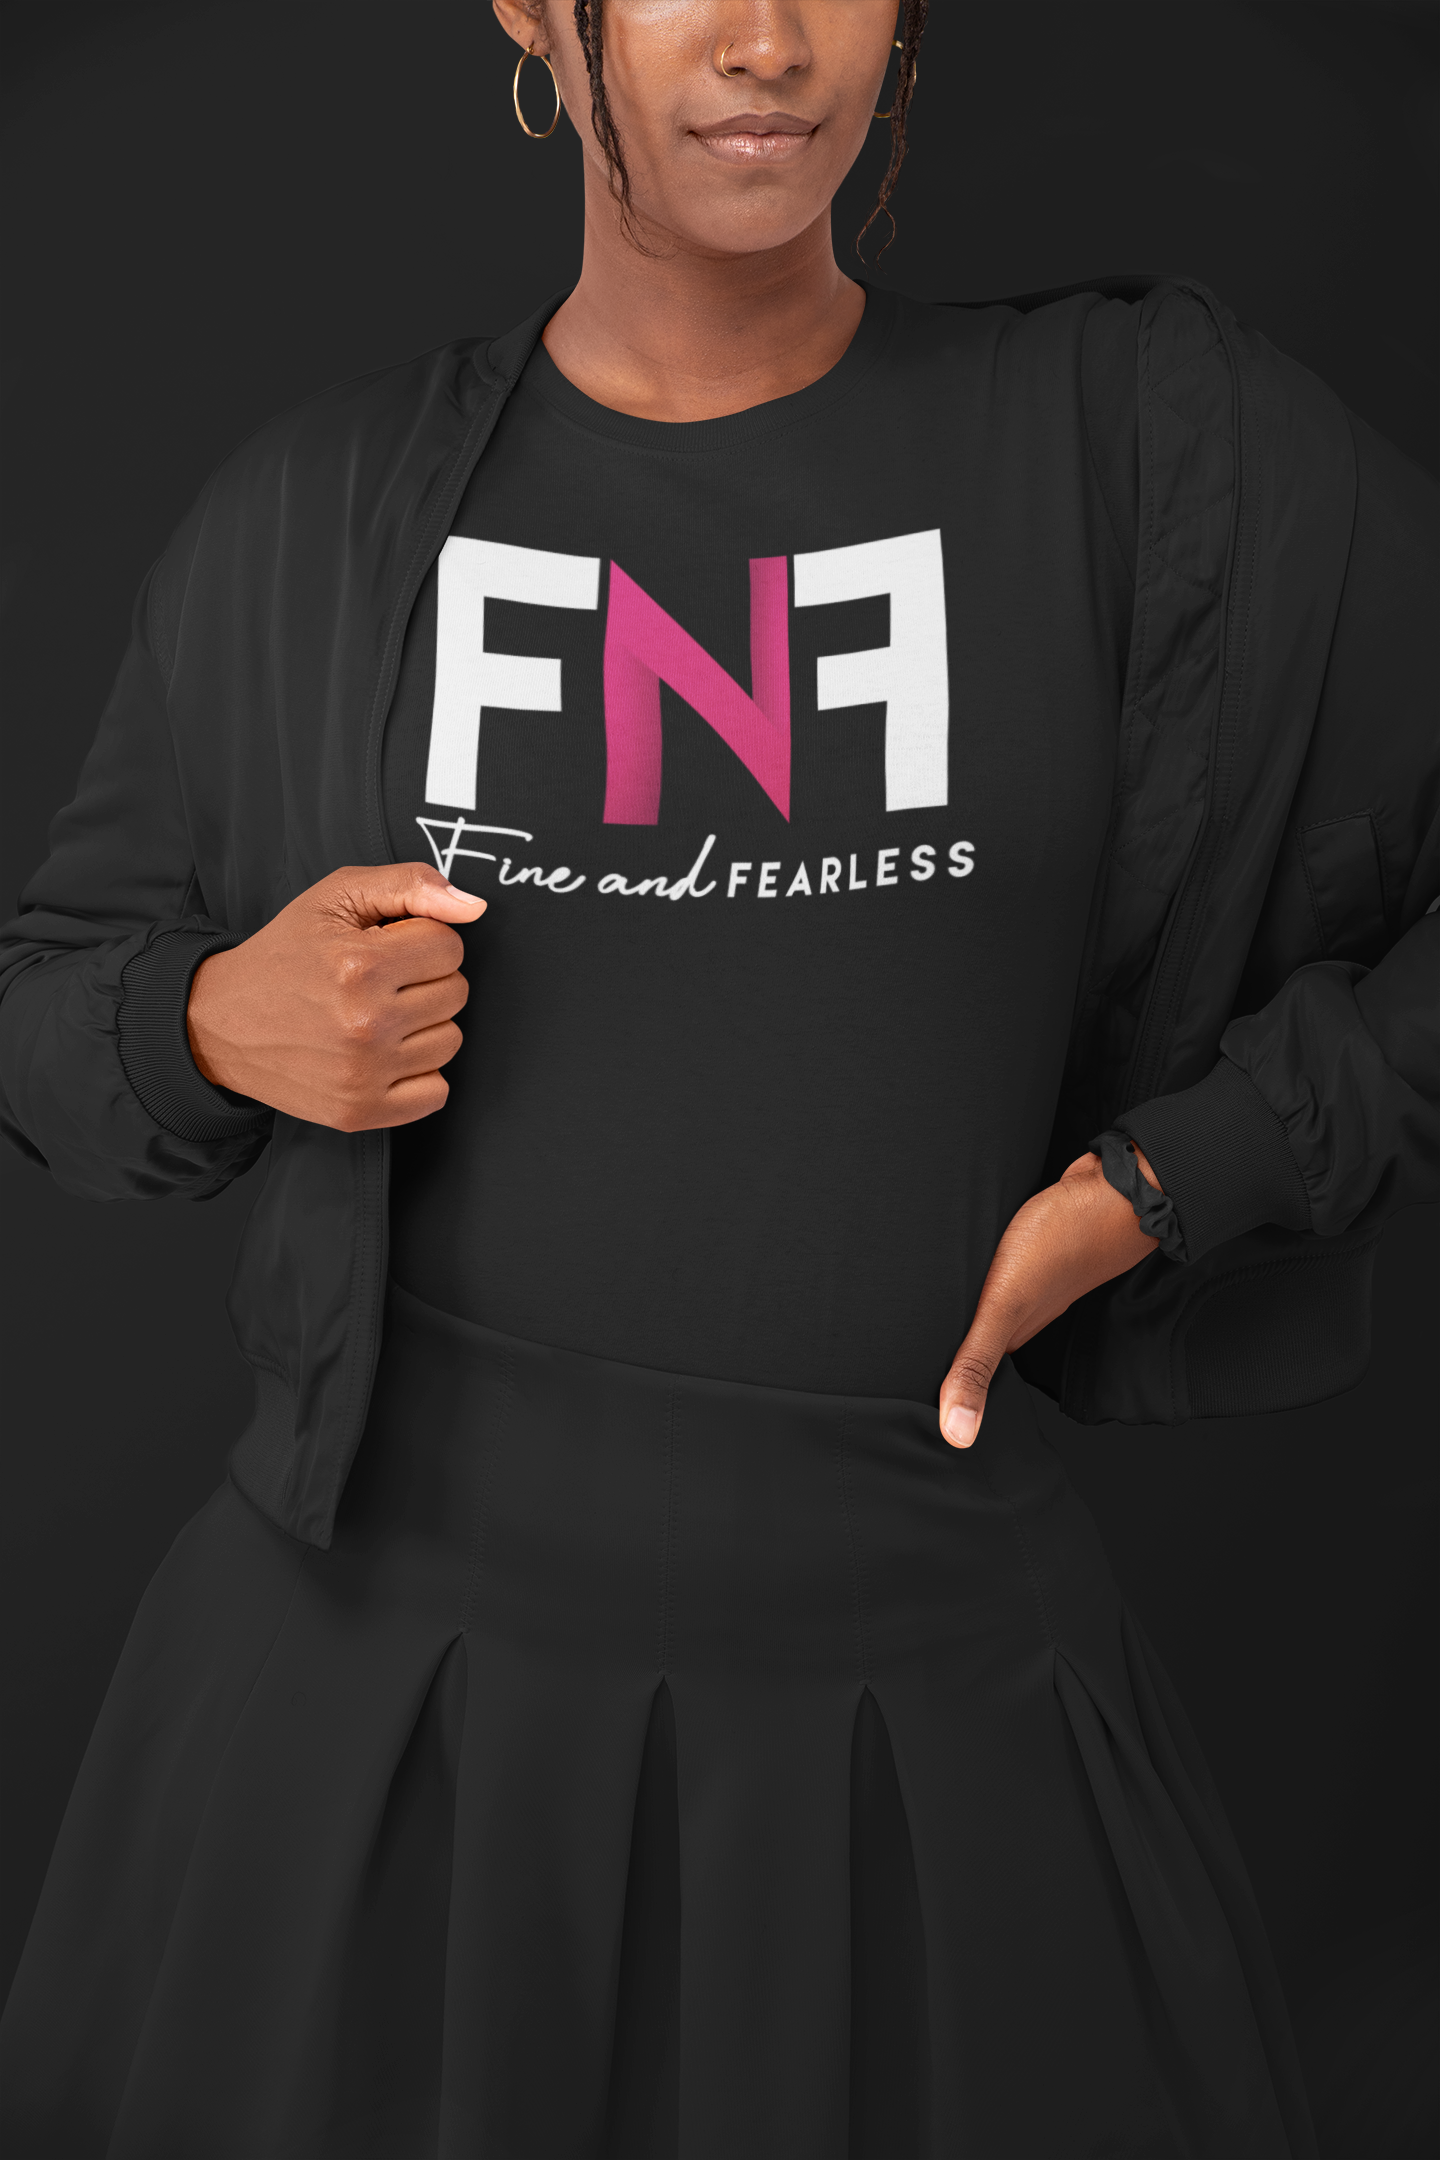 The Official Fine and Fearless Tee